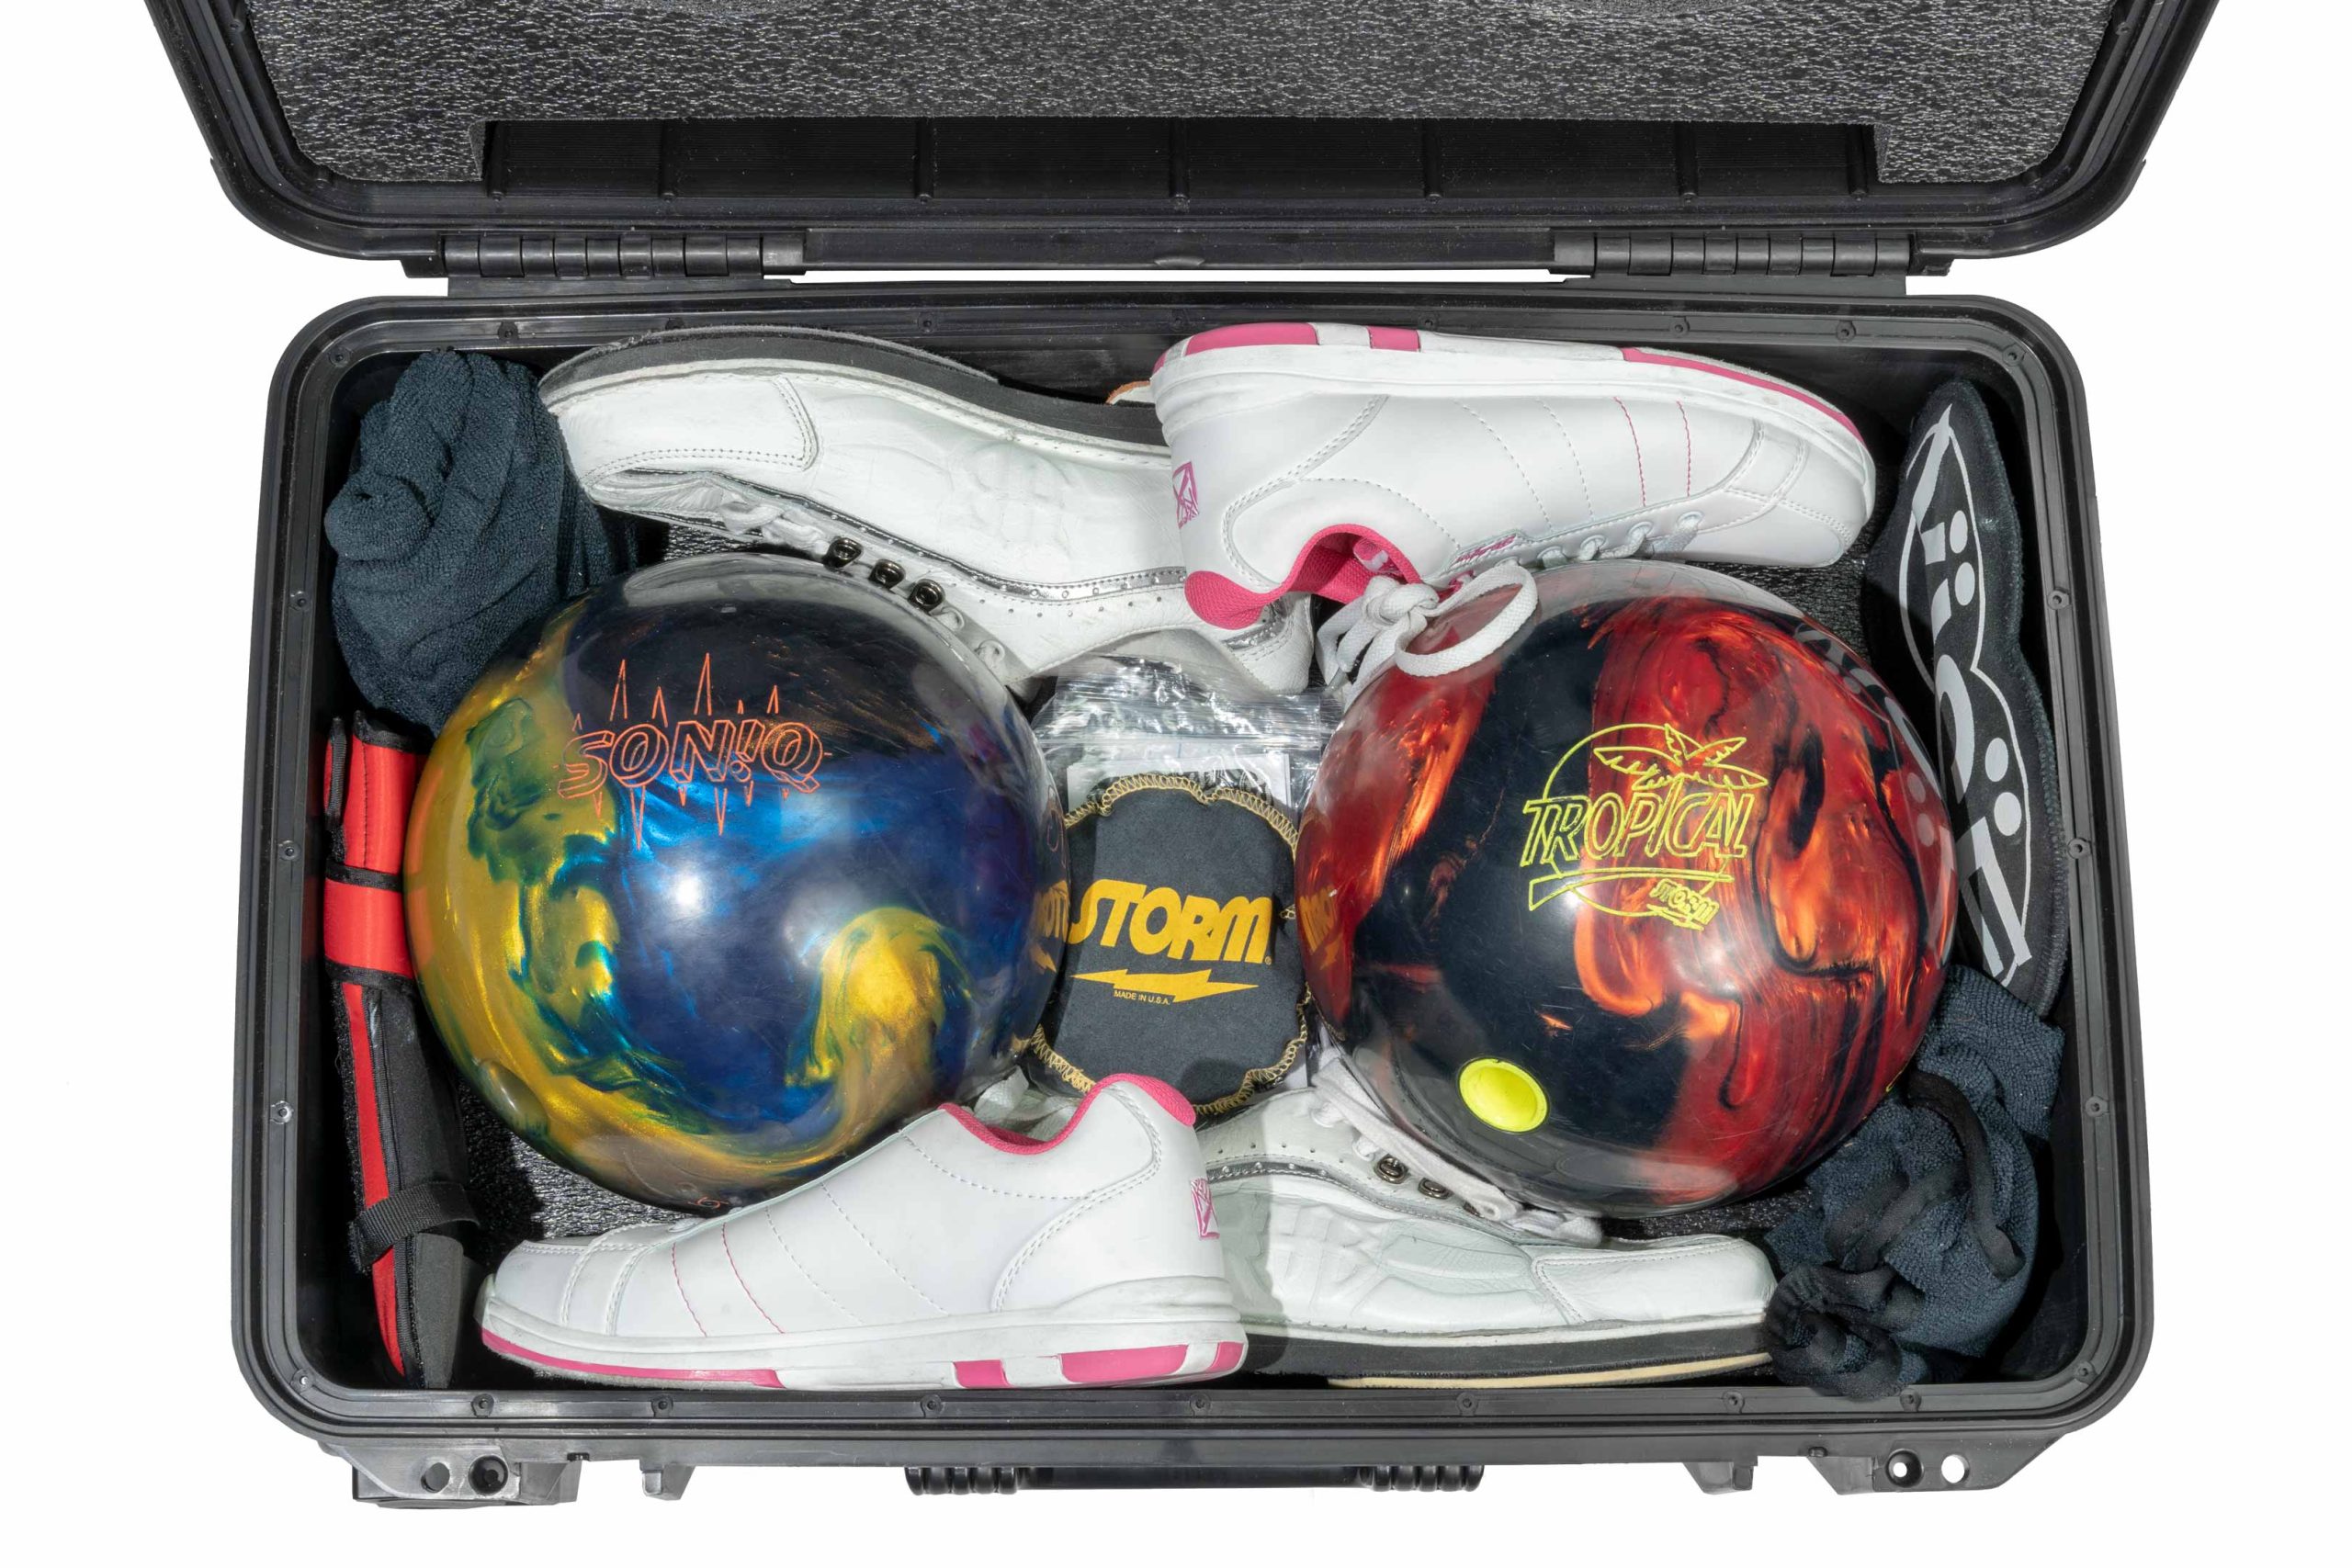 2022 New Portable Bowling Ball Storage Case Ball Carrier Bag